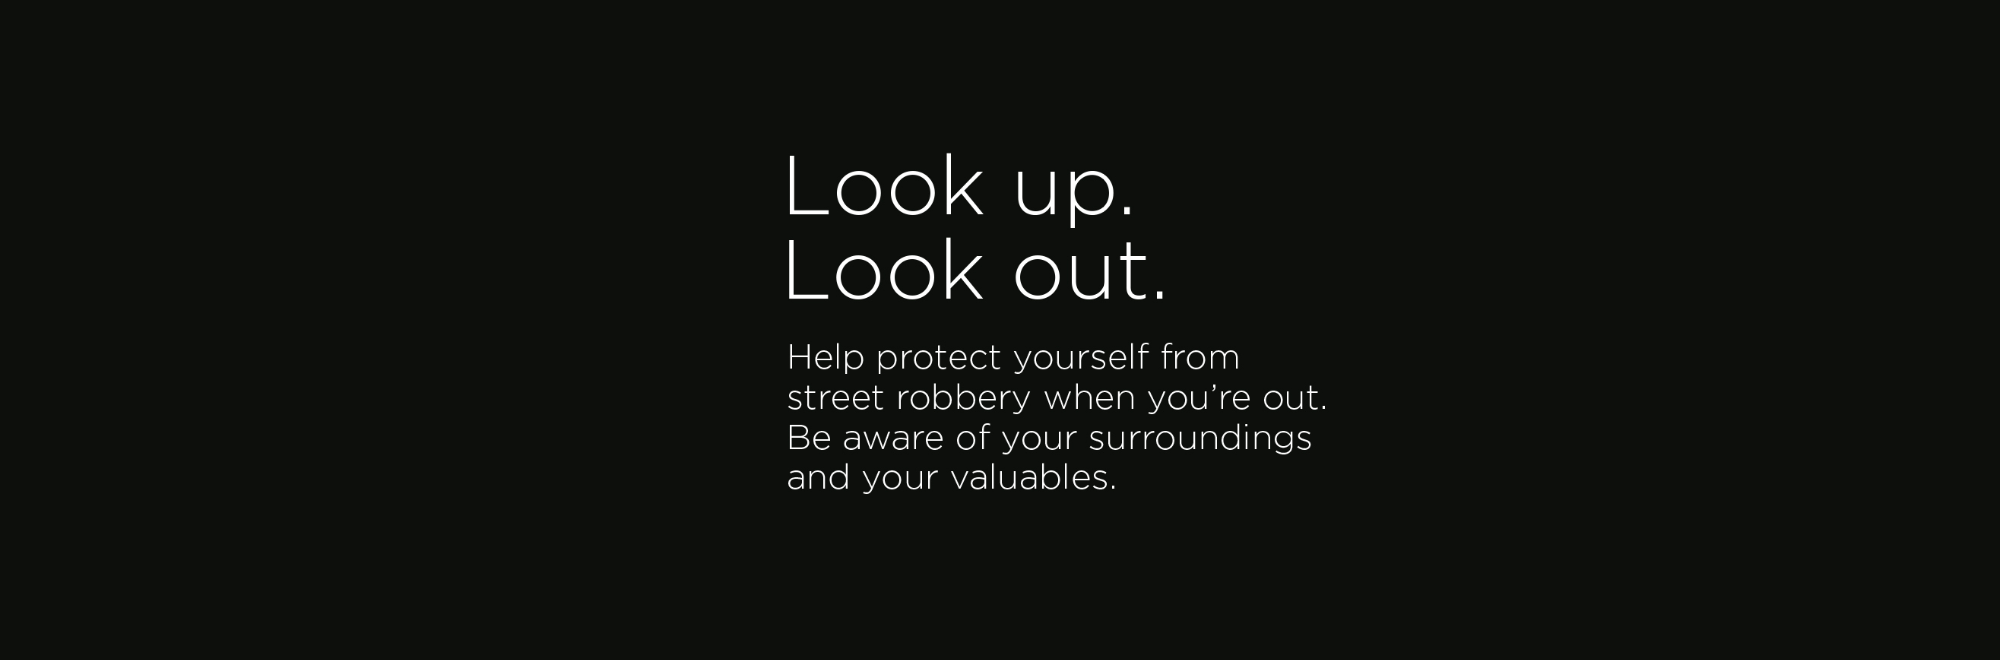 The Metropolitan Police and AMV BBDO launch new anti-robbery campaign "Don't Look"